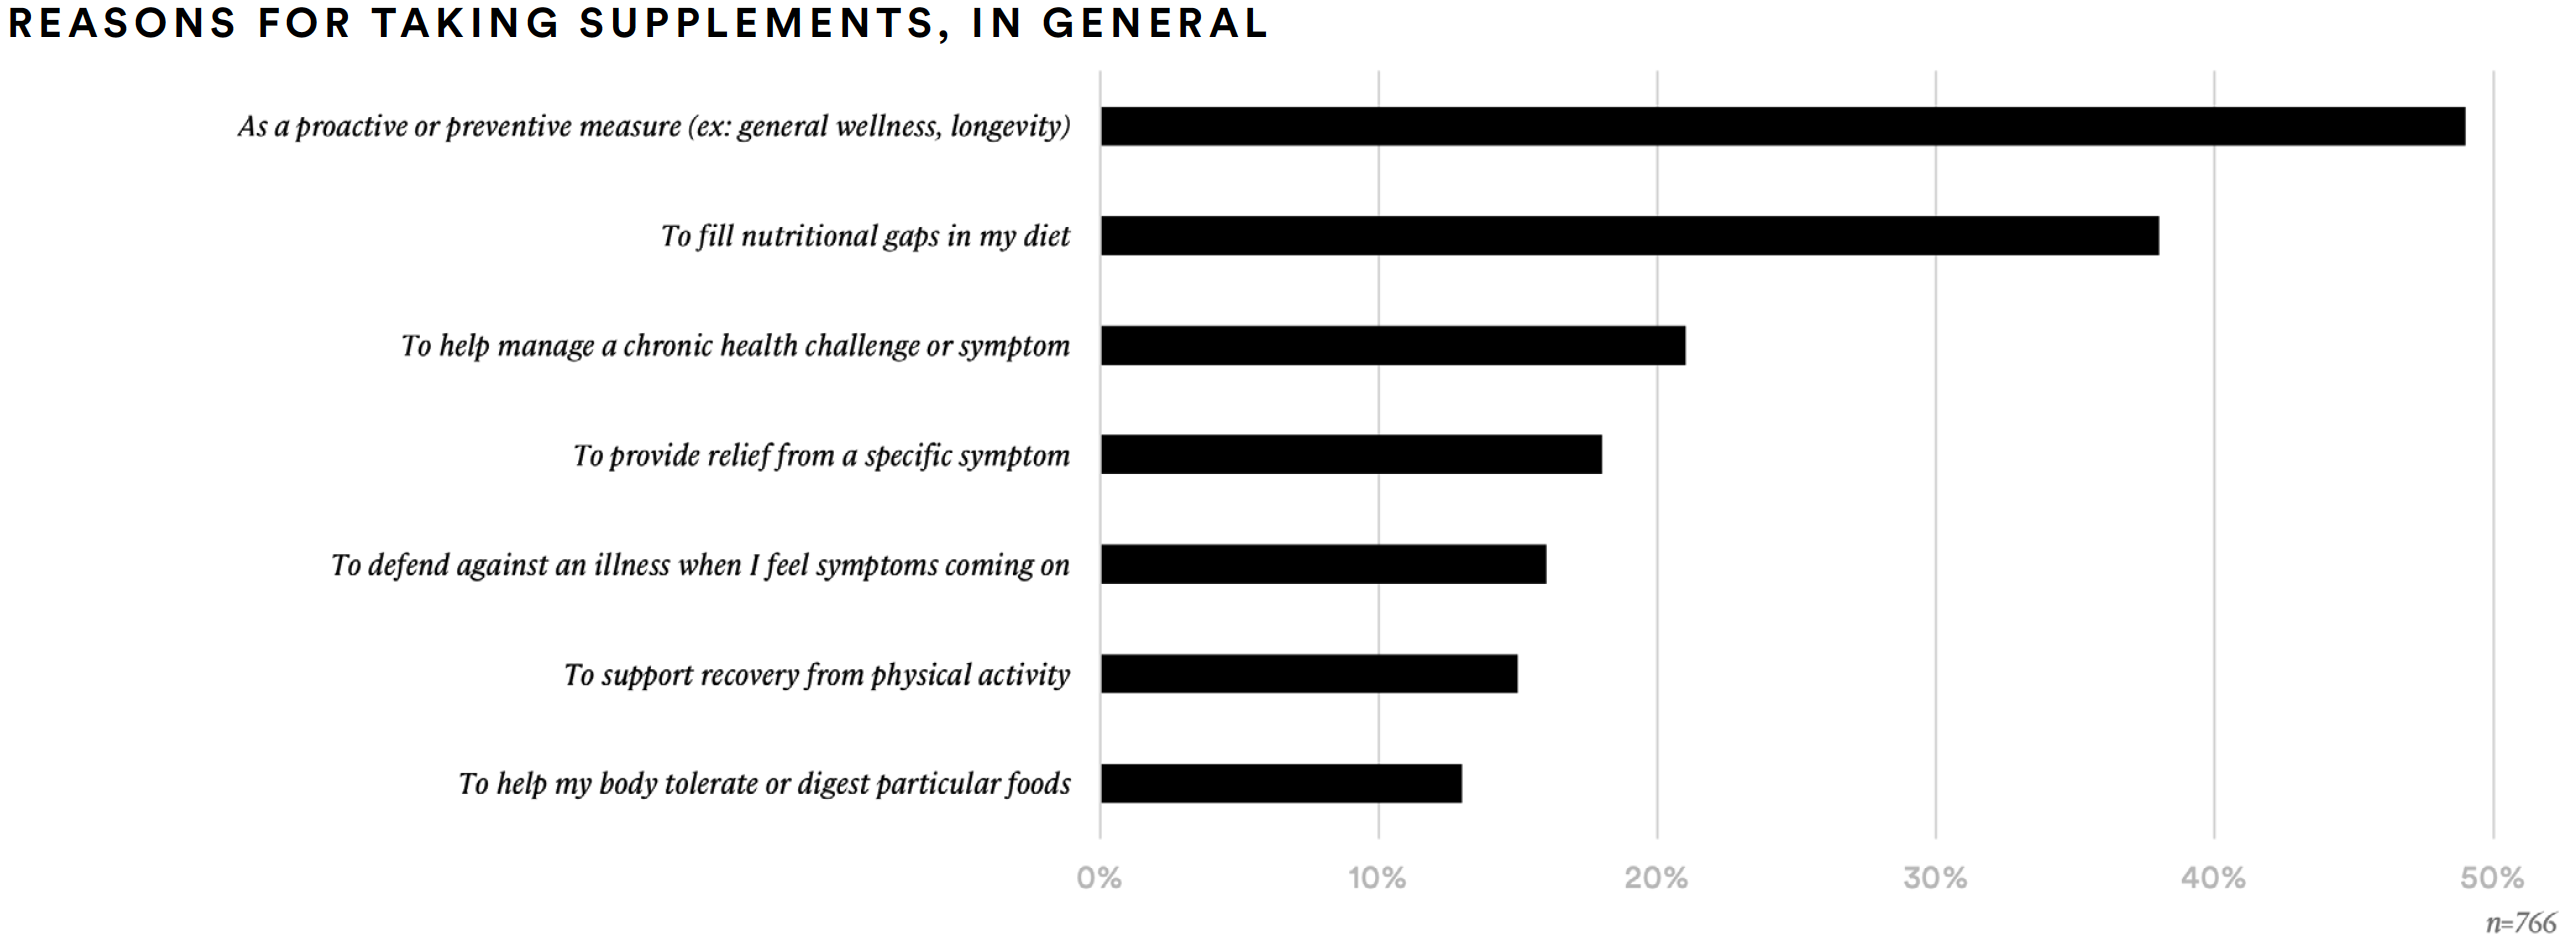 reasons for taking supplements, in general